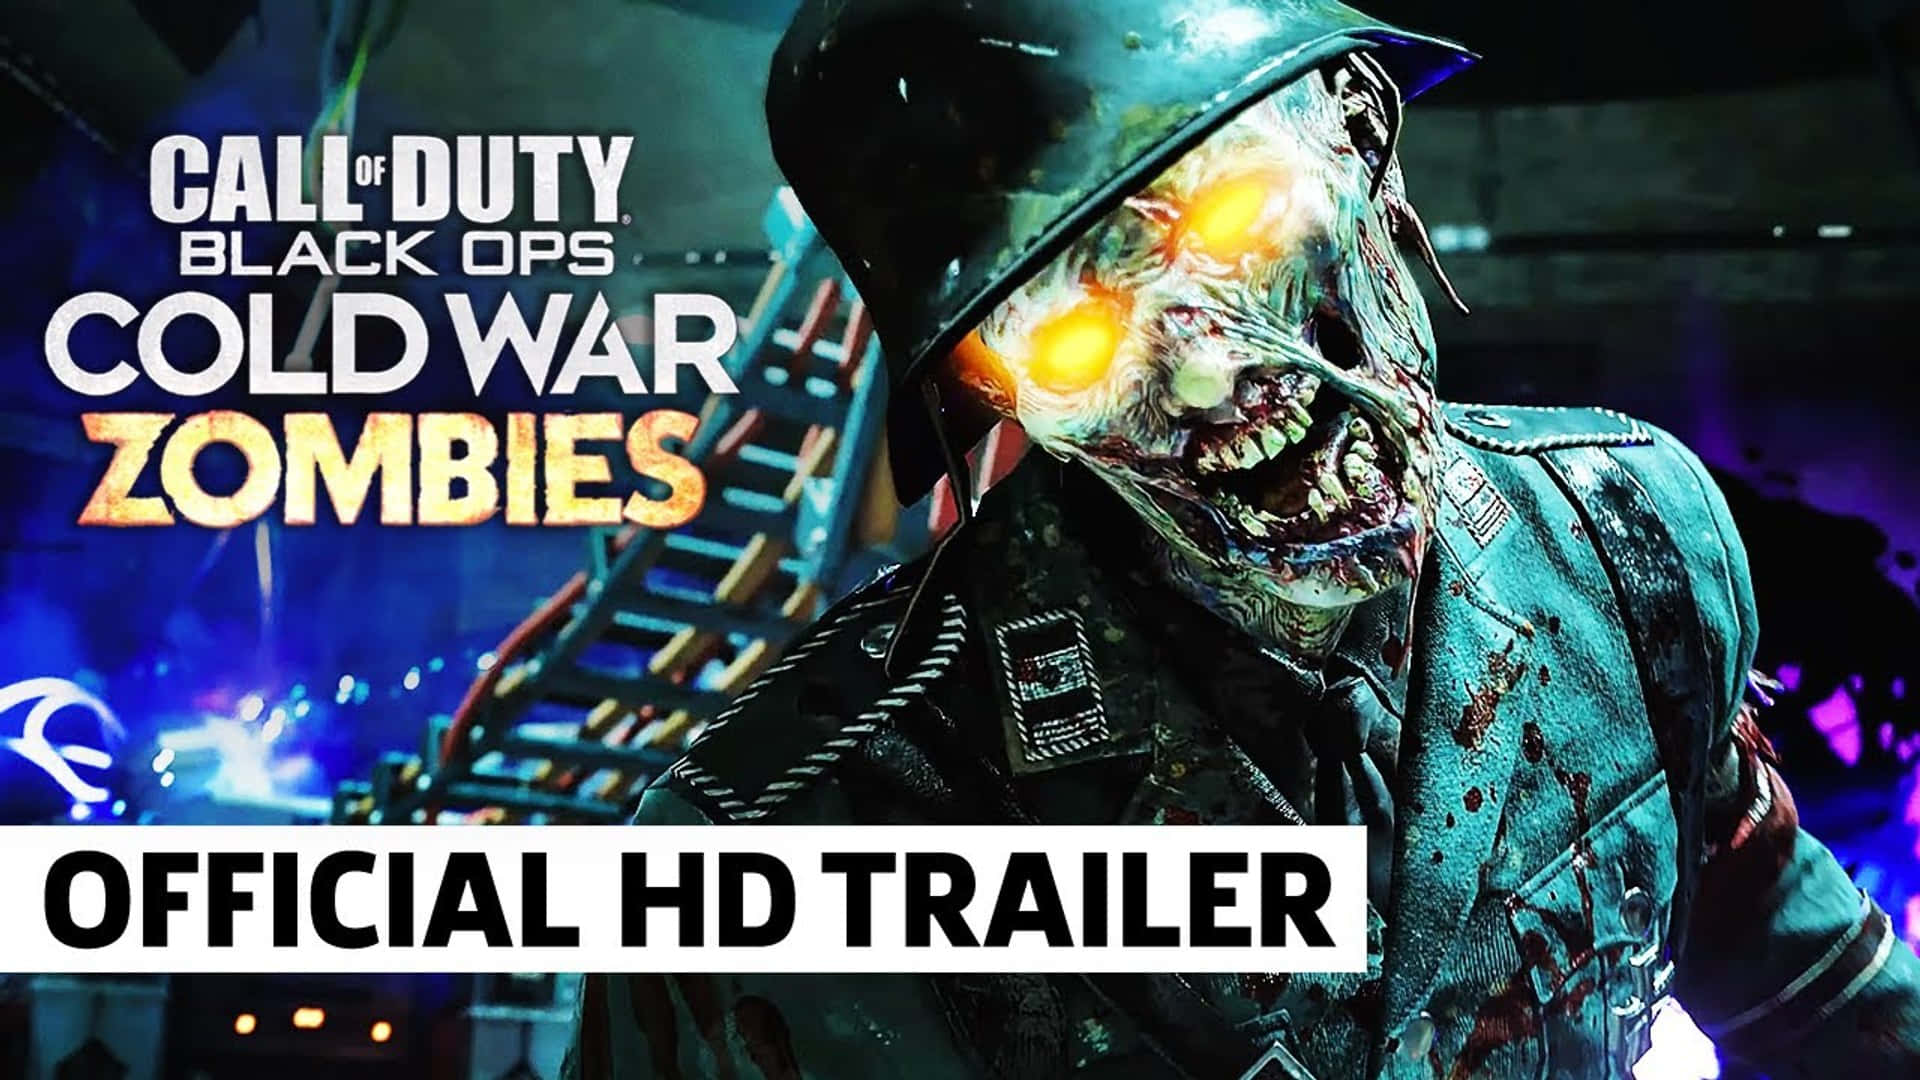 call of duty cold war eps cold zombies official hd trailer